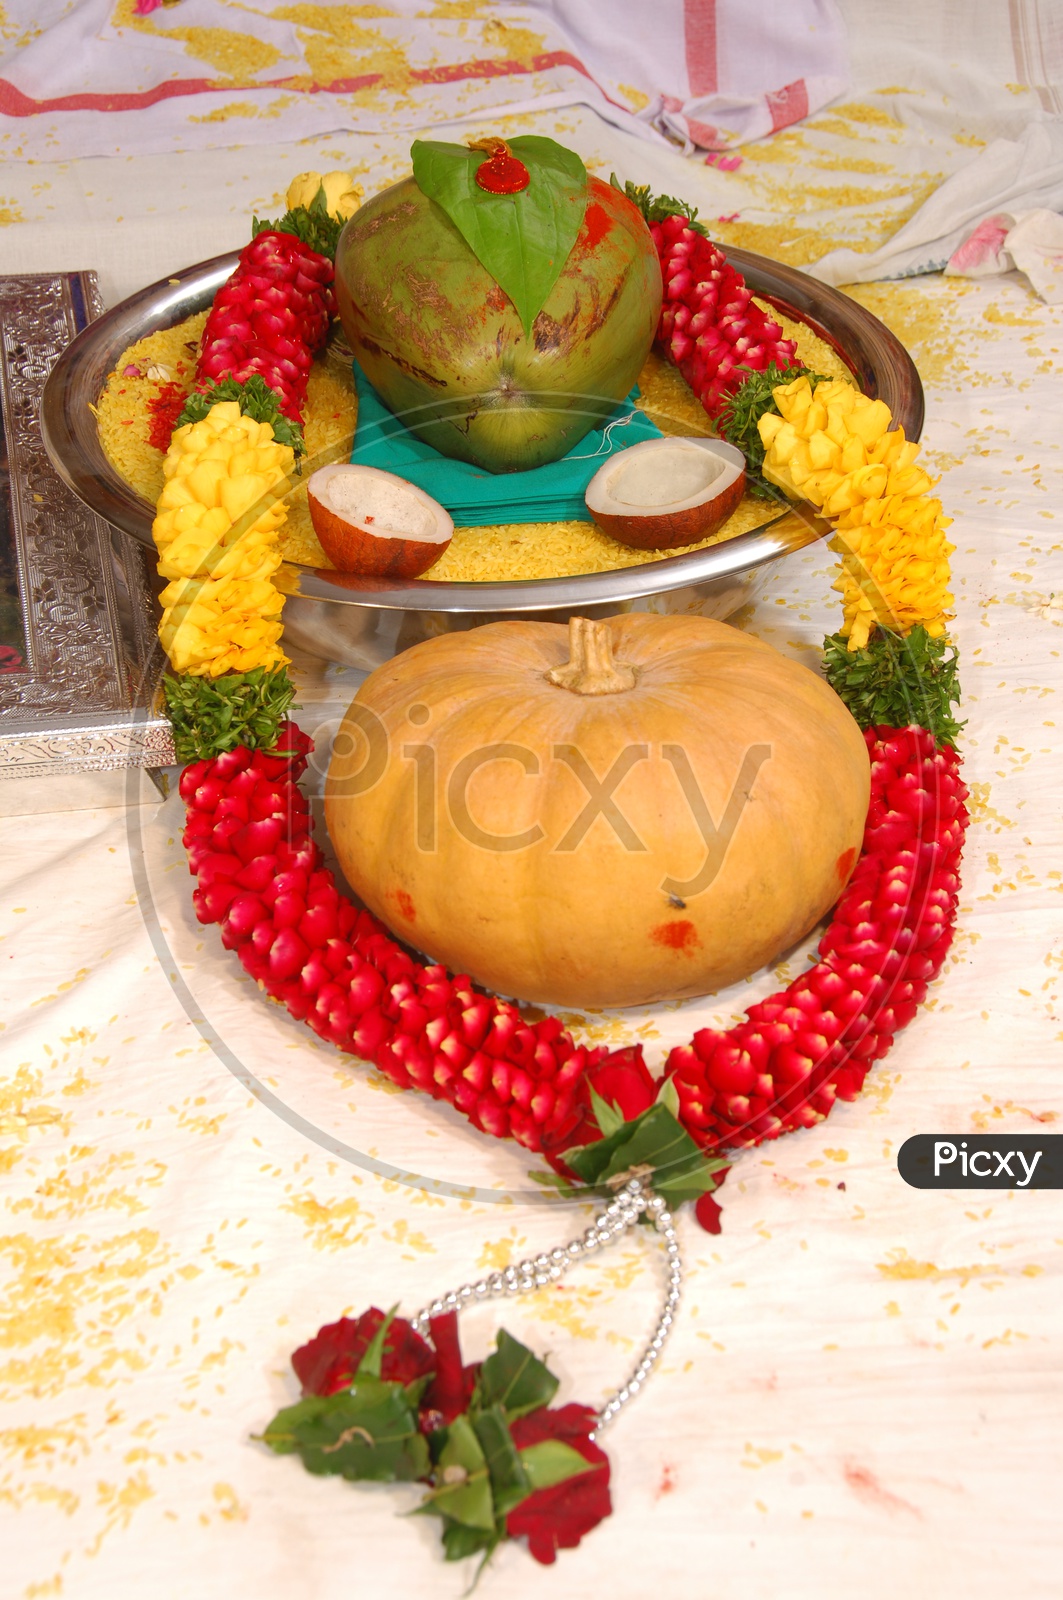 South Indian Prayer Items for Wedding